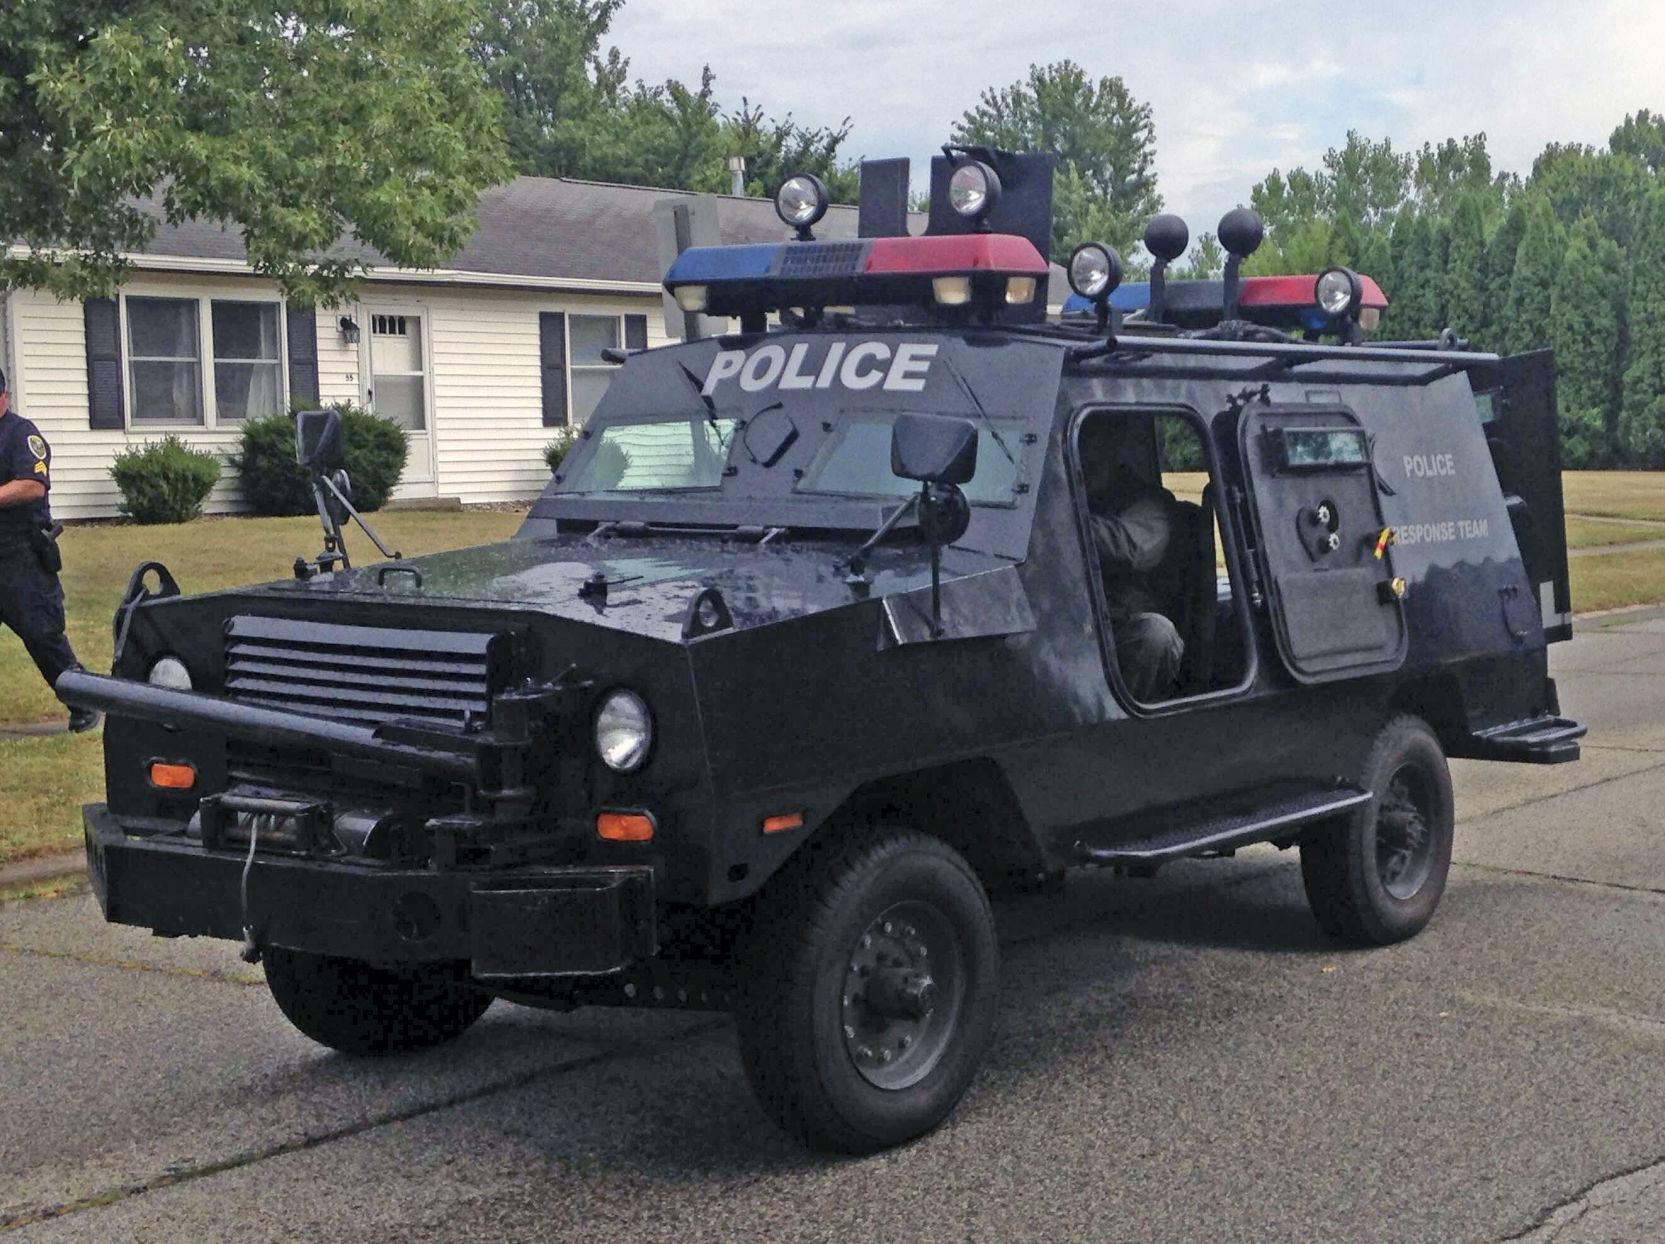 Nappanee man arrested after standoff shuts down neighborhood for hours ...